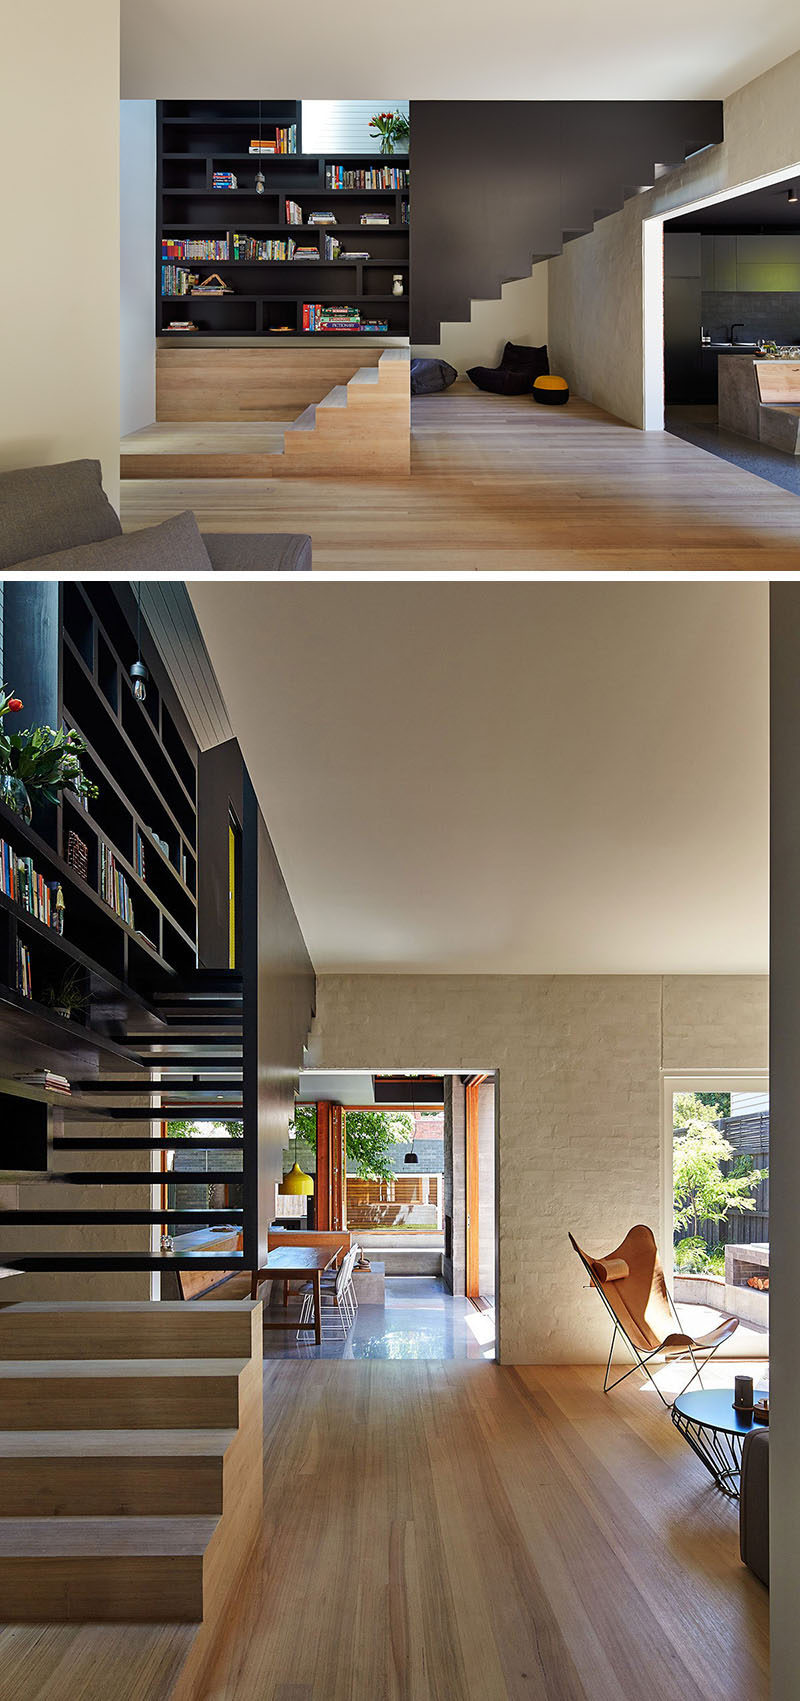 Stairs Design Ideas - 12 Examples Of Staircases With Bookshelves // This bookshelf starts when the materials change and carries on all the way to the top of the stairs.